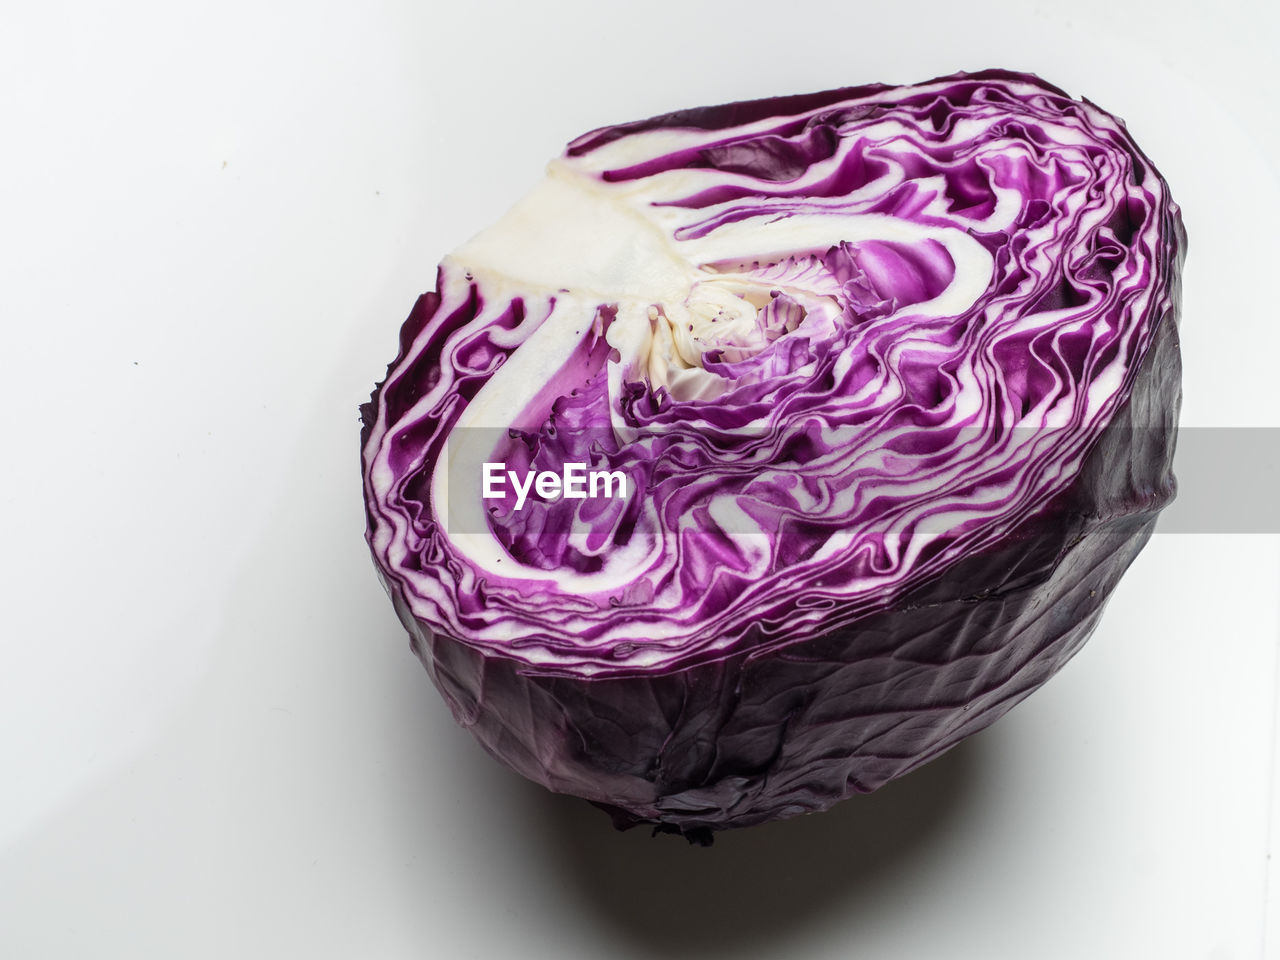 Close-up of red cabbage on table